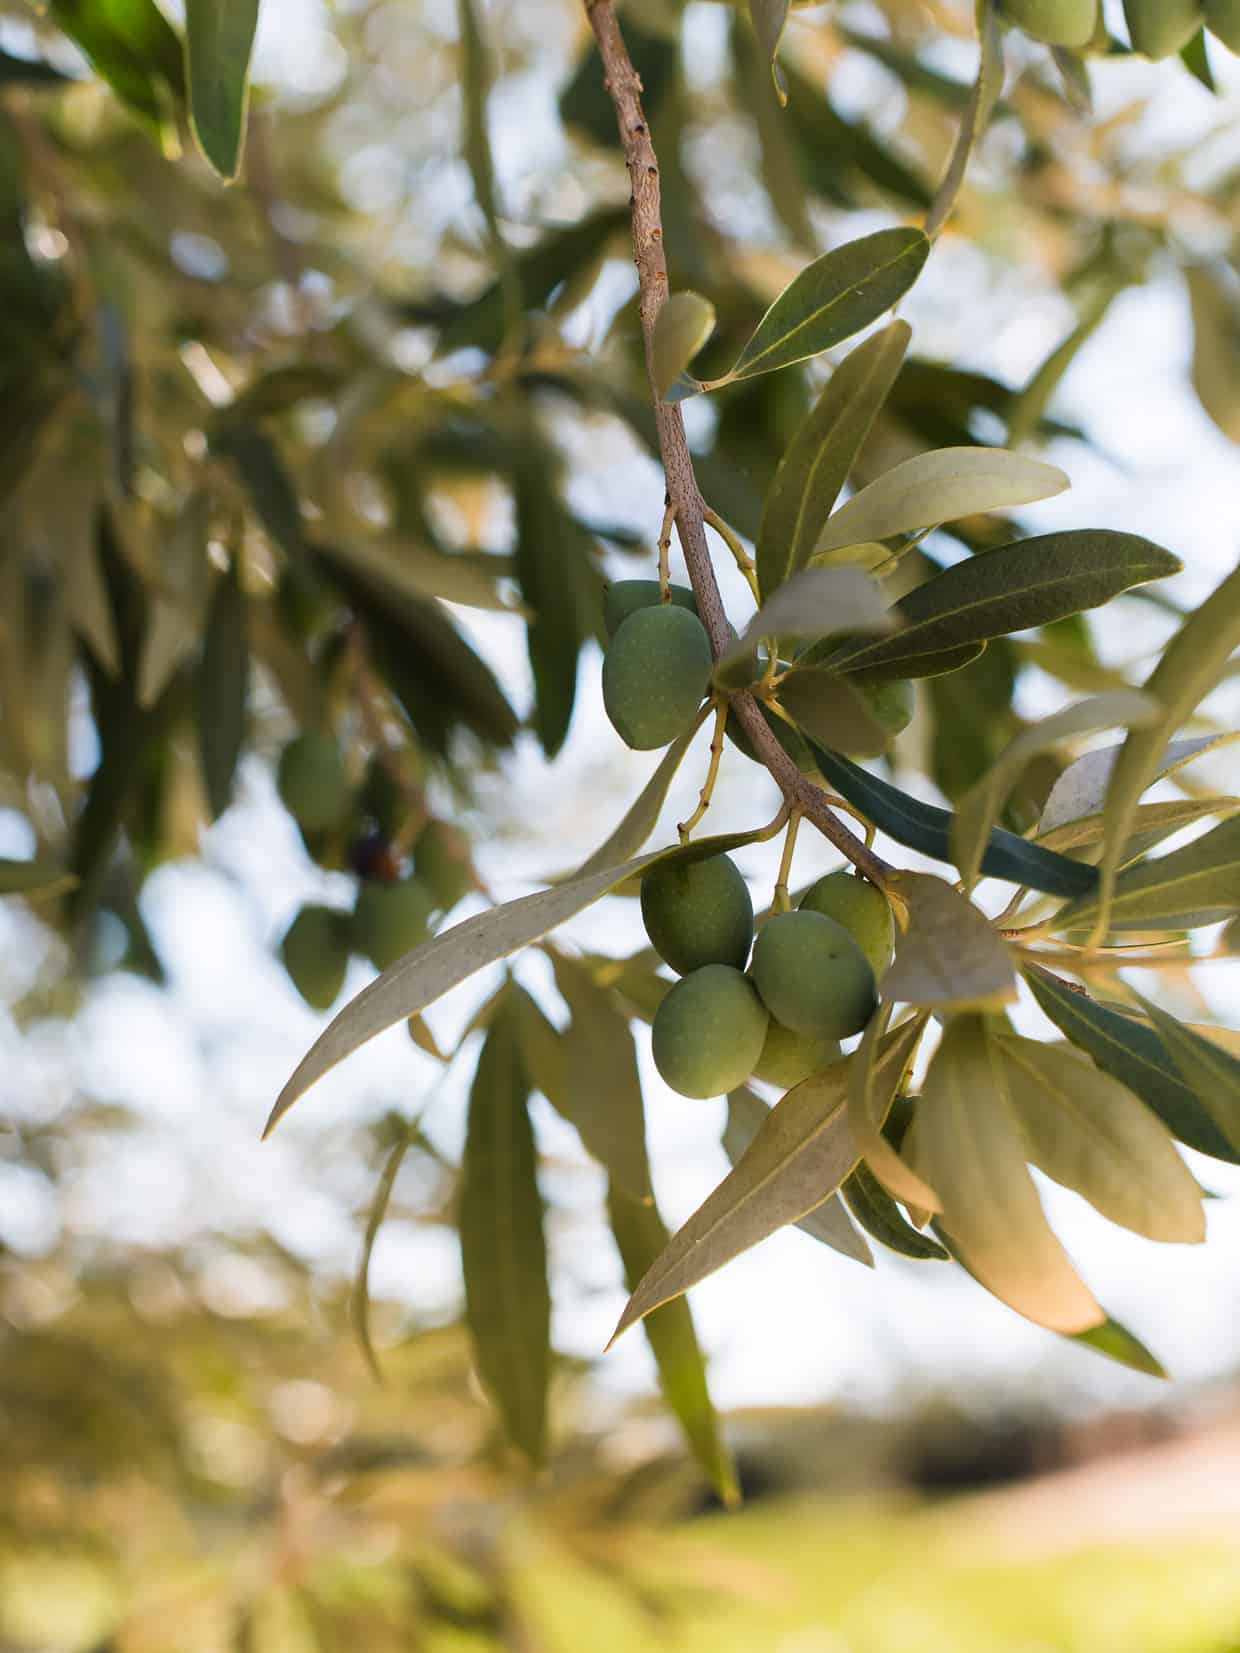 Close up of olives growing on a tree branch.